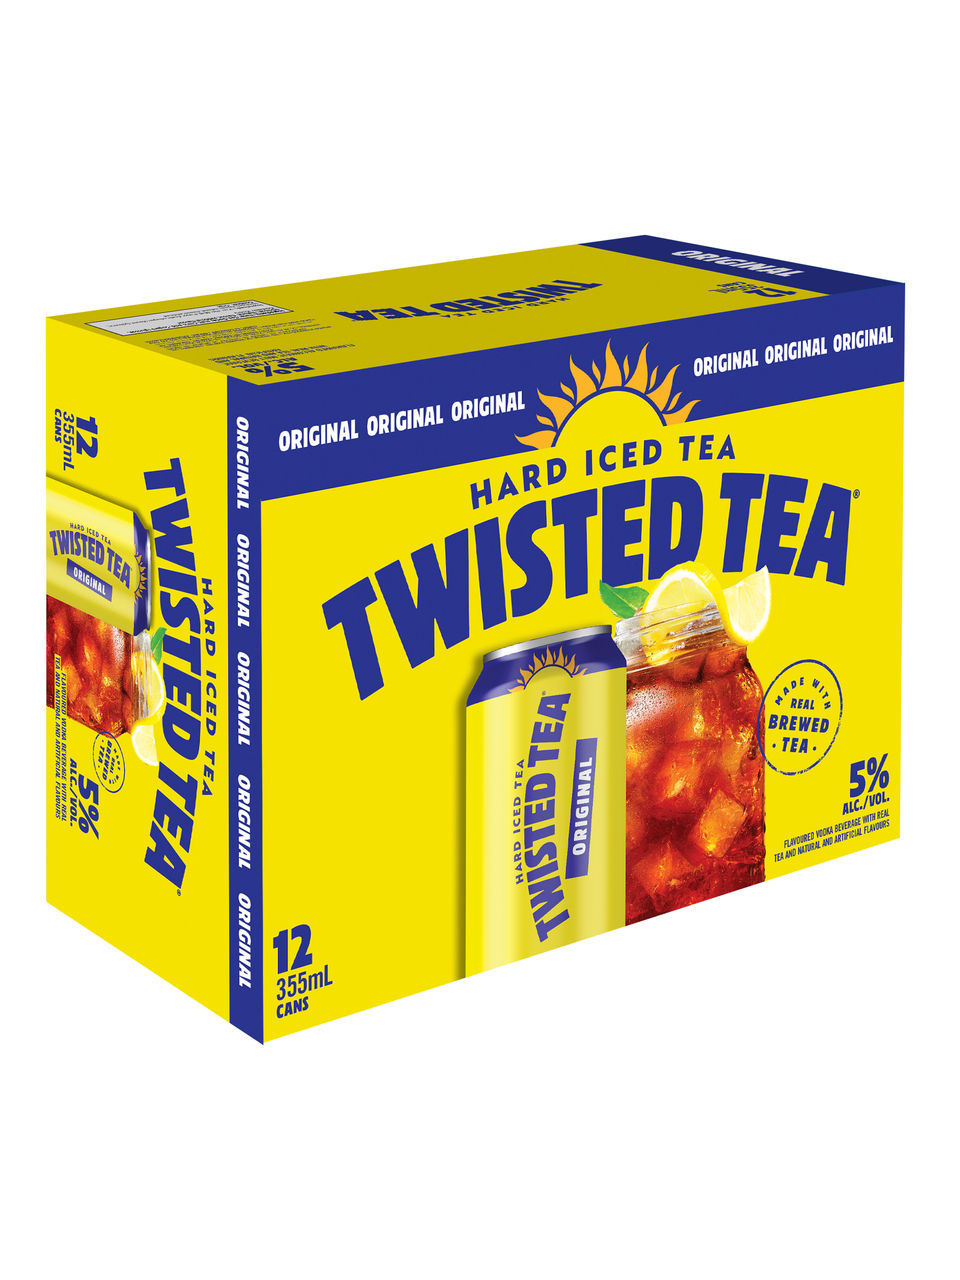 How Much Is 12 Pack Twisted Tea? 